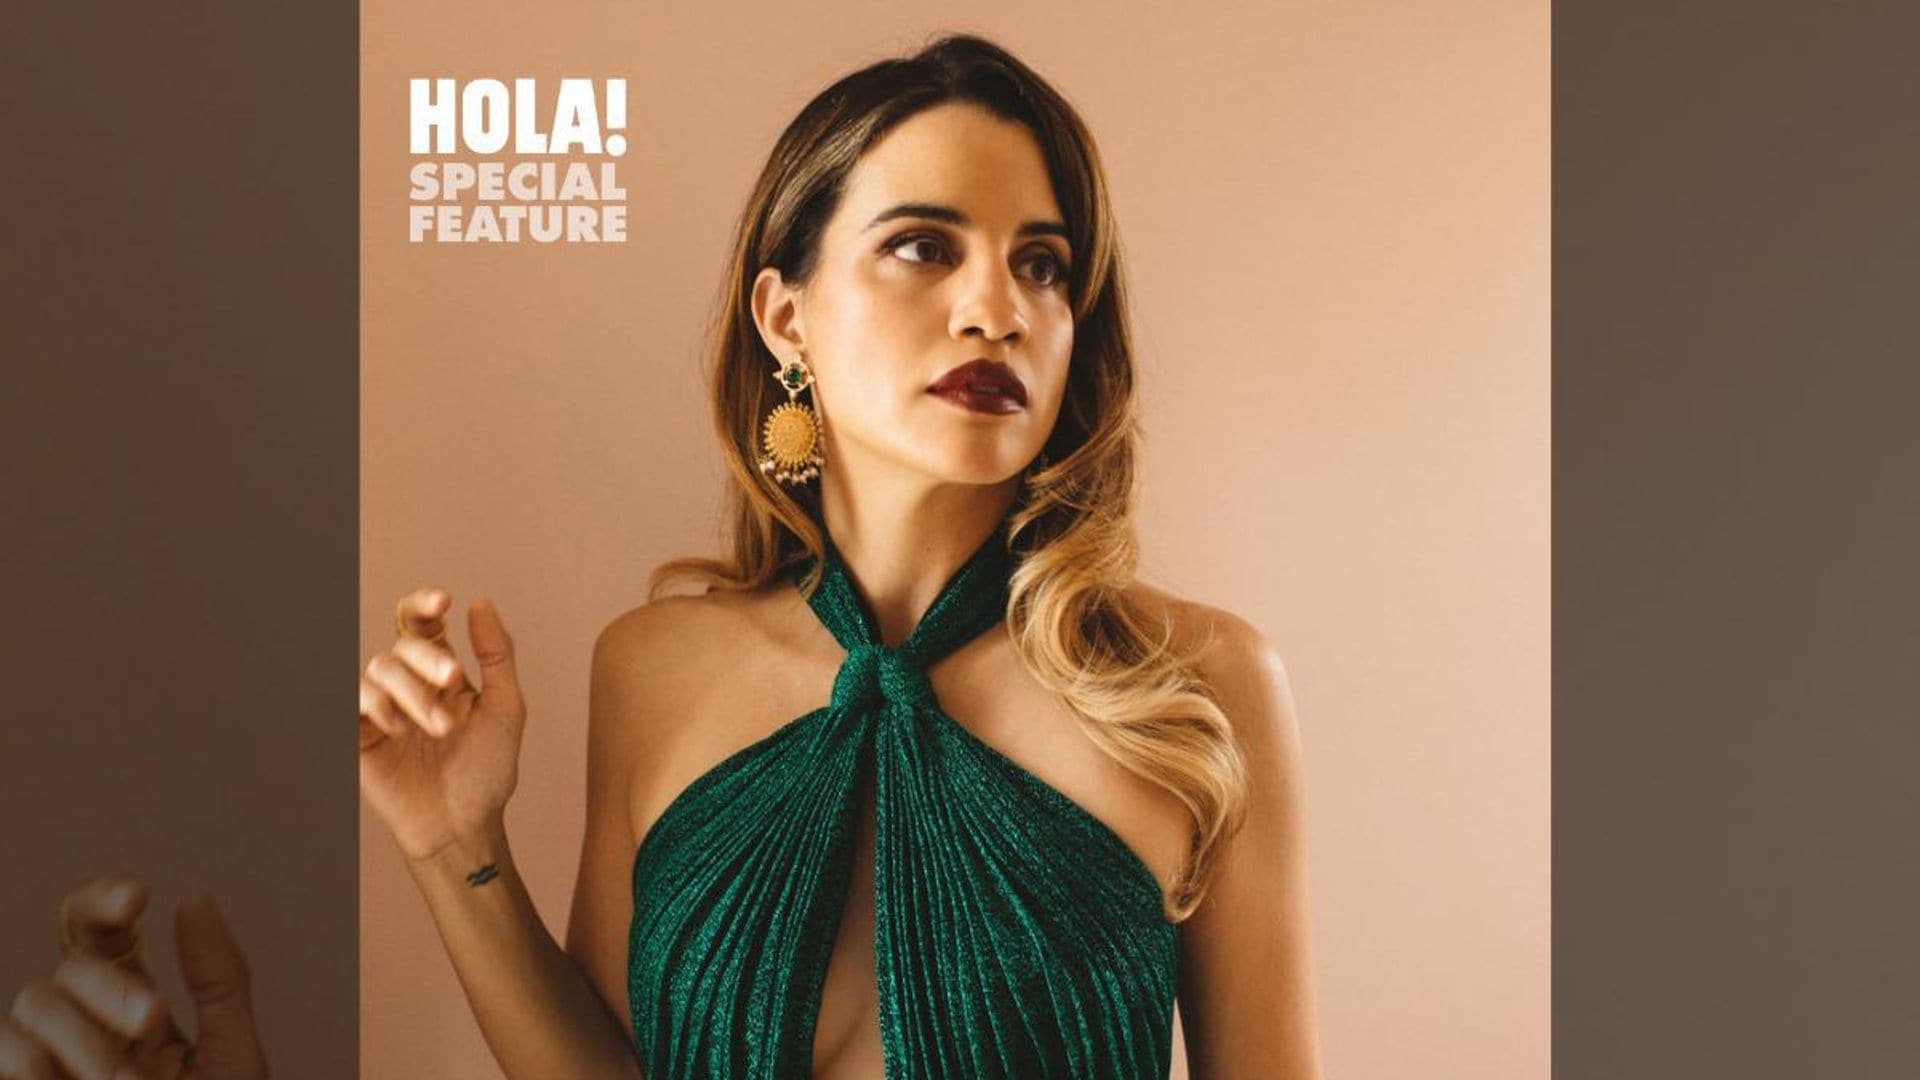 [EXCLUSIVE] Natalie Morales: The actress and director is making her mark in Hollywood